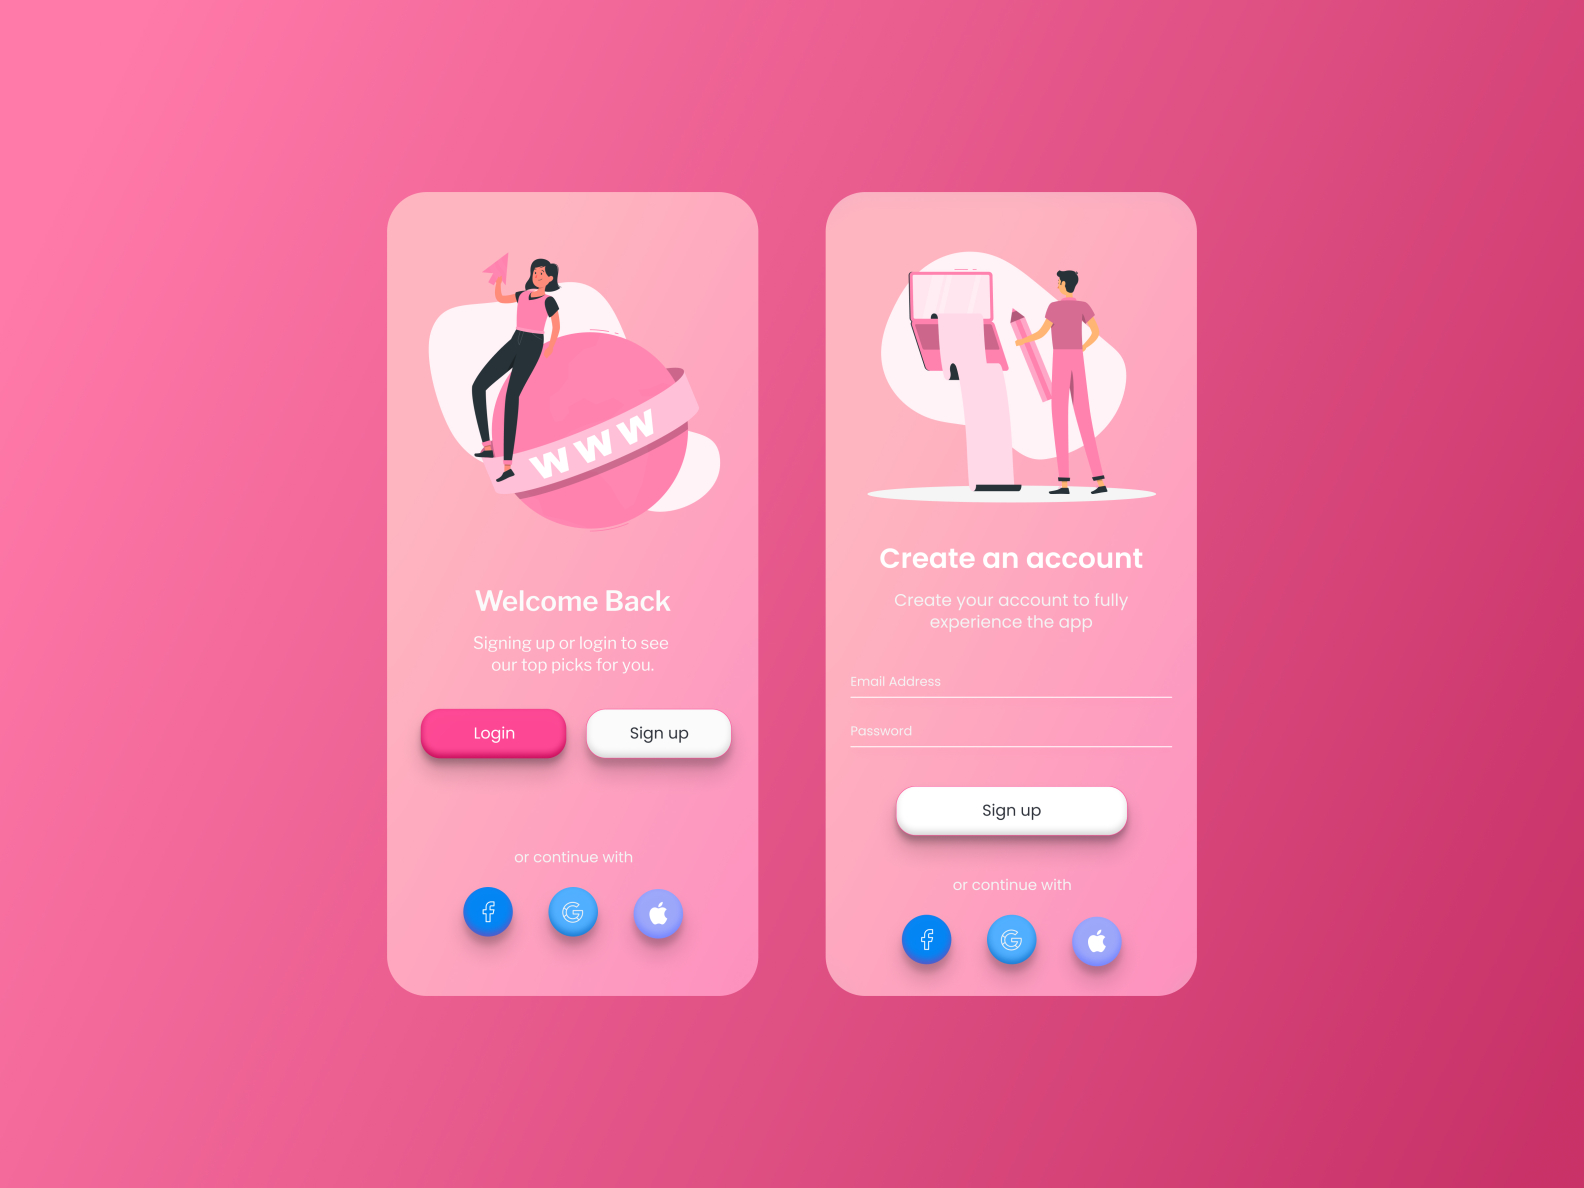 Sign up by quocthinh.duong on Dribbble